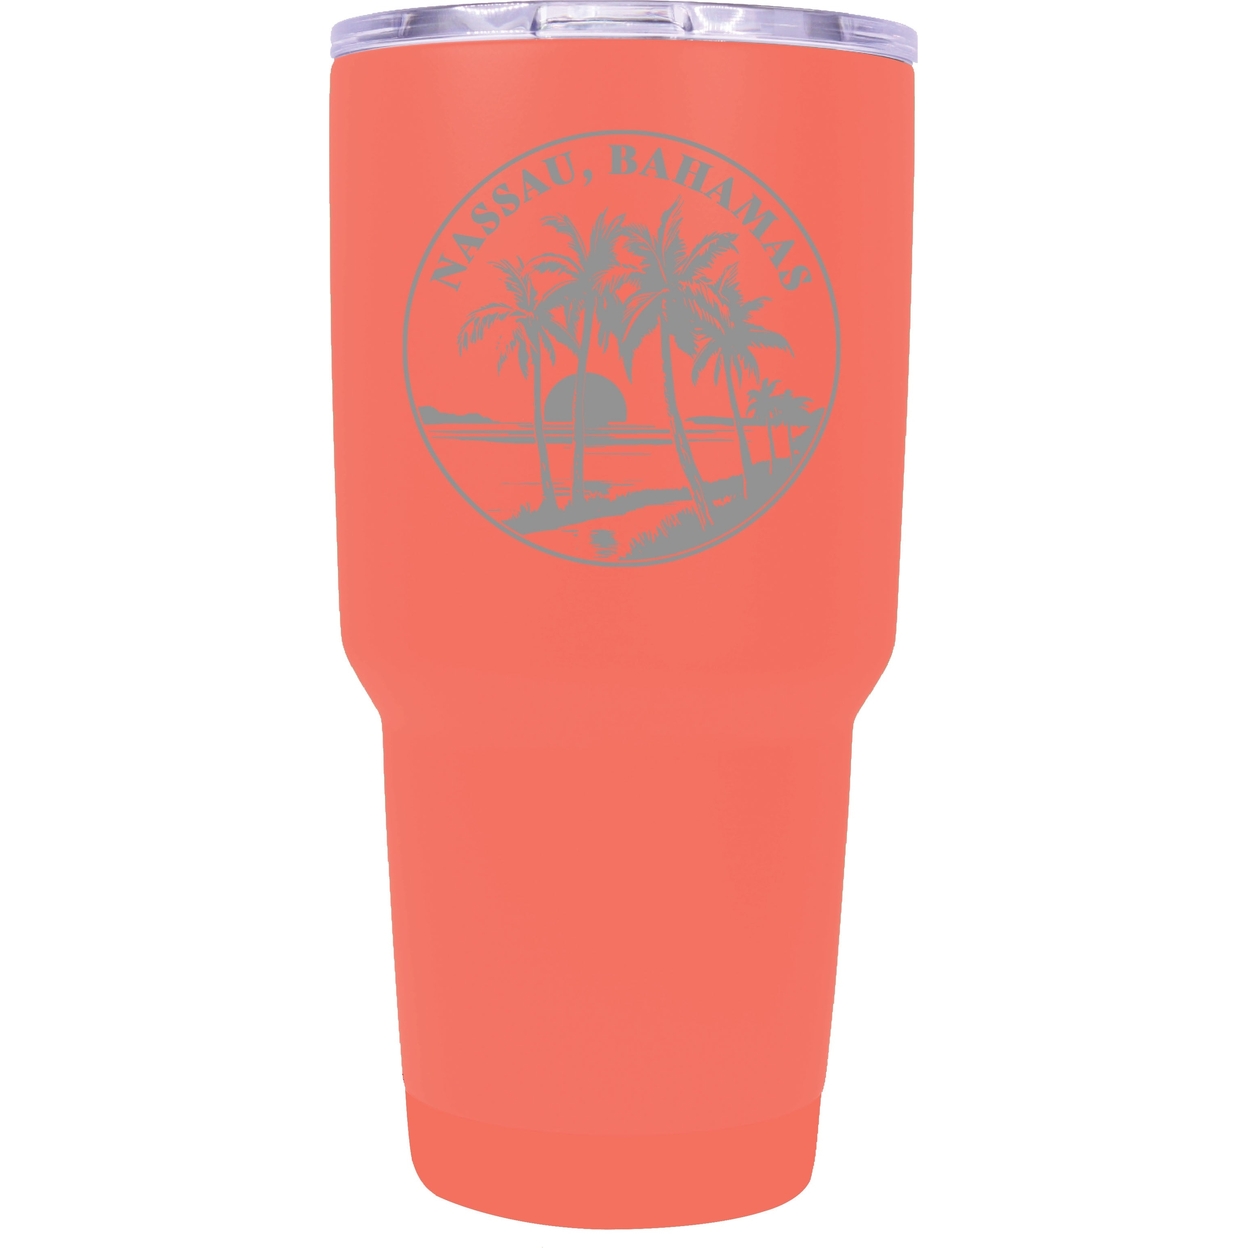 Nassau The Bahamas Souvenir 24 Oz Engraved Insulated Stainless Steel Tumbler - Coral,,4-Pack